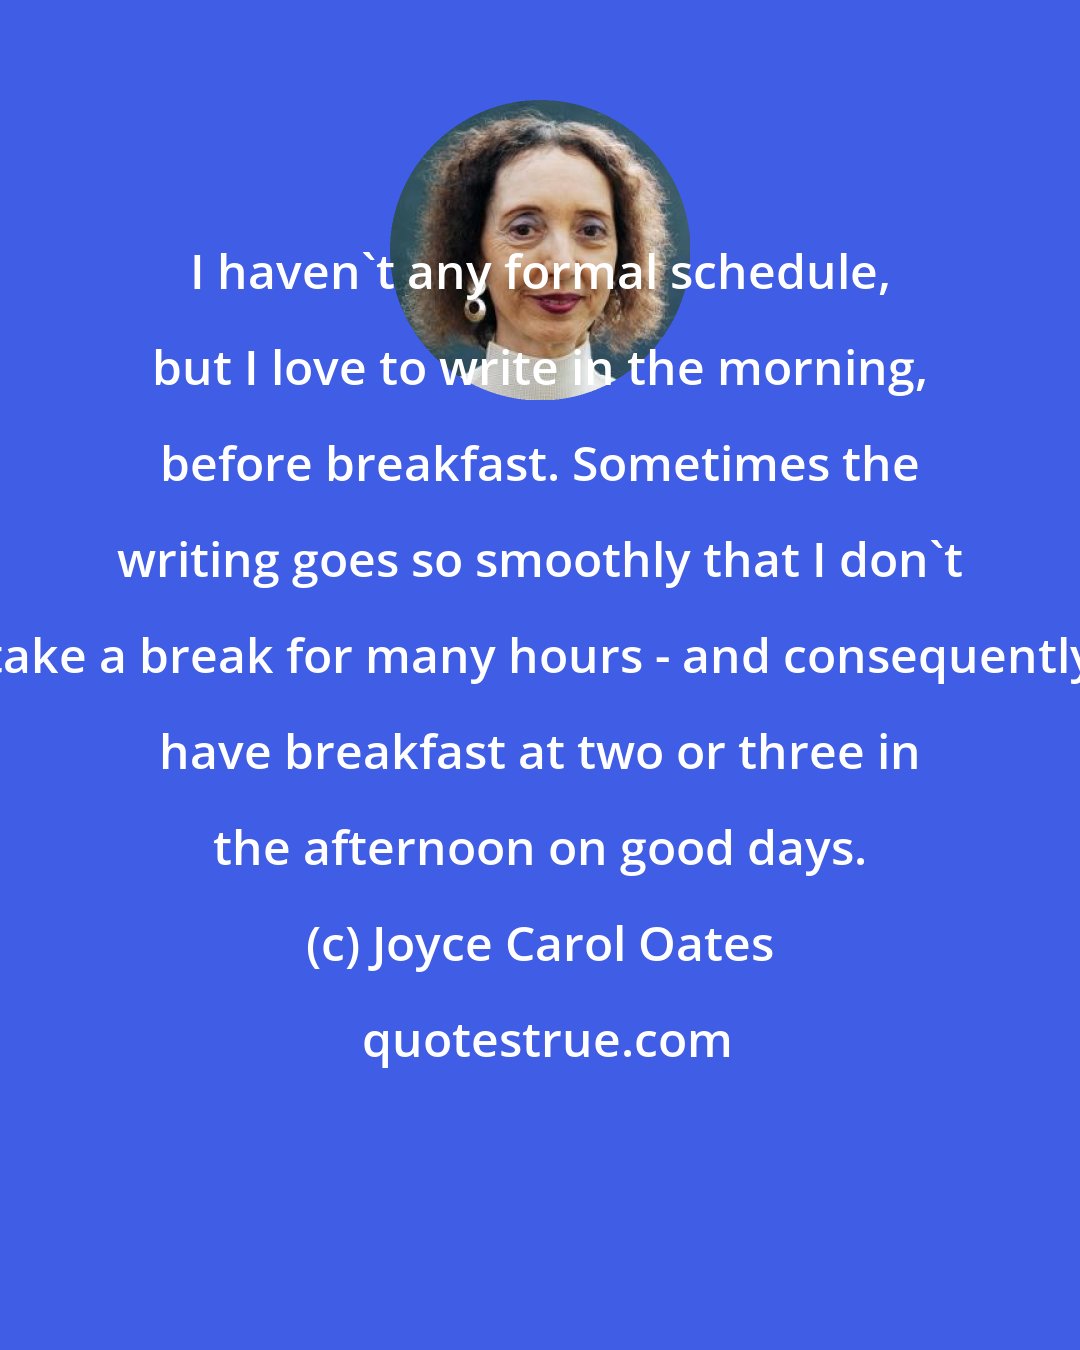 Joyce Carol Oates: I haven't any formal schedule, but I love to write in the morning, before breakfast. Sometimes the writing goes so smoothly that I don't take a break for many hours - and consequently have breakfast at two or three in the afternoon on good days.